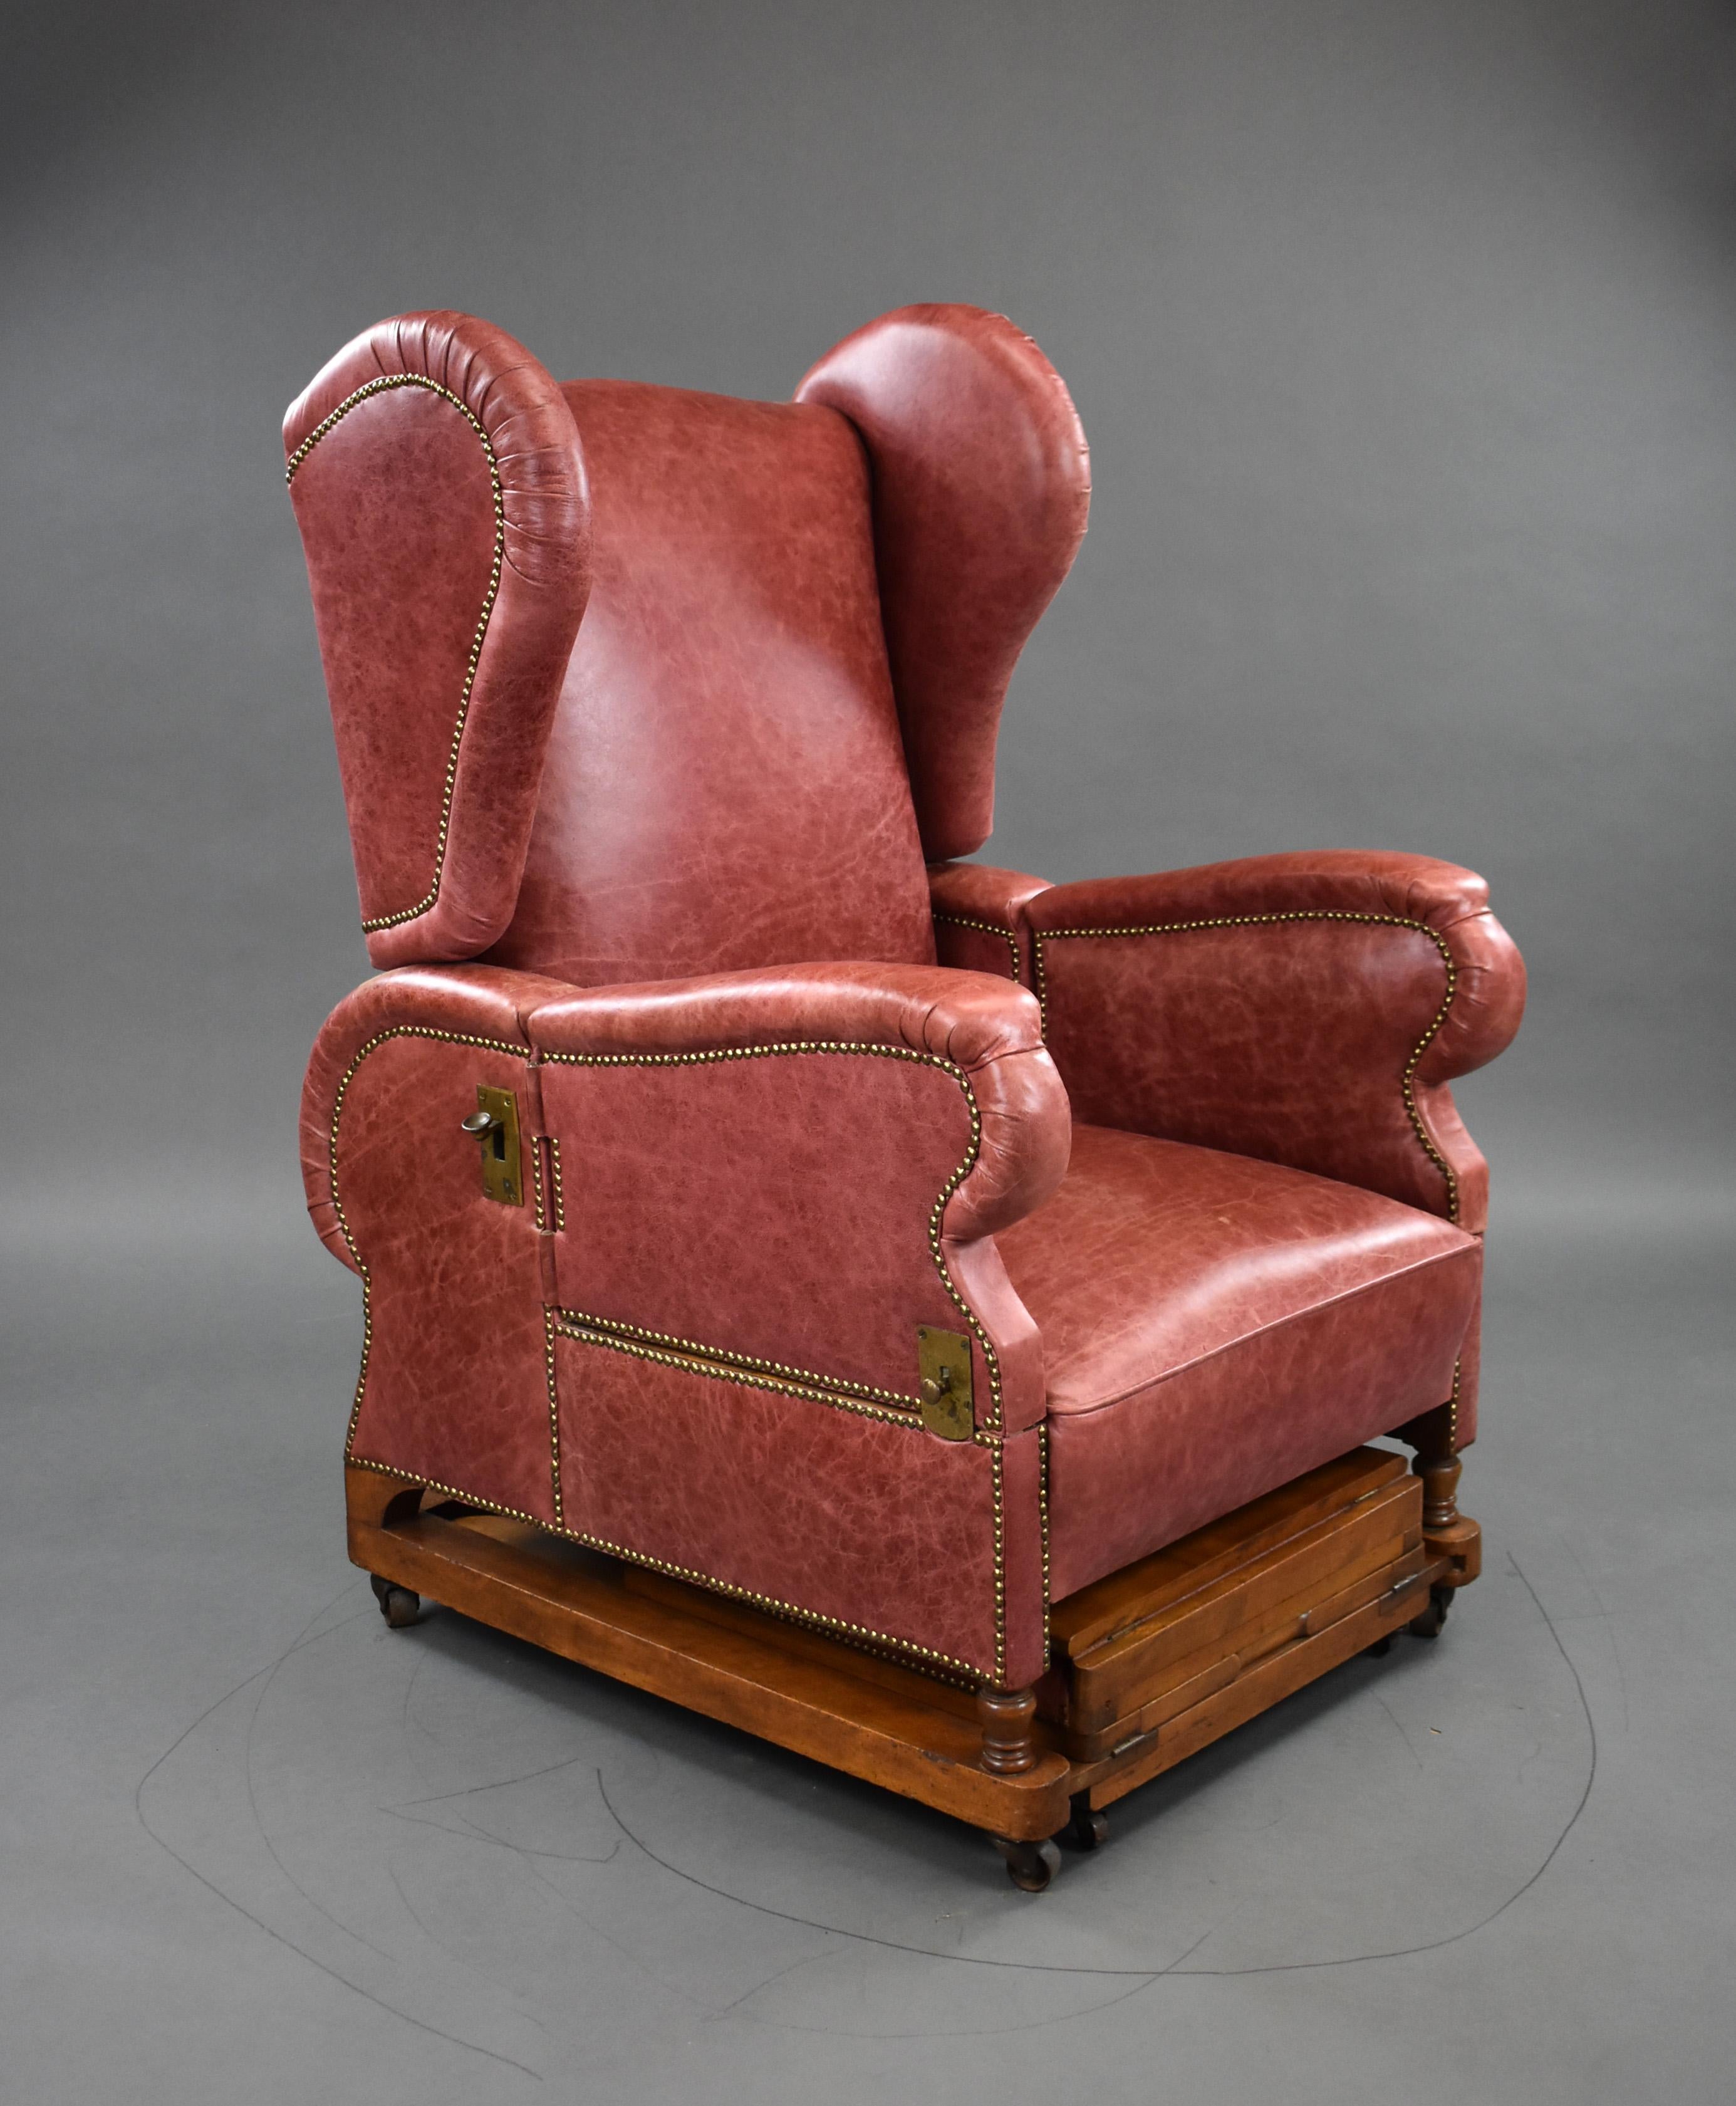 For sale is a good quality antique leather reclining chair by J Foot & Sons Ltd. The chair remains in very good condition and is fully operational, showing signs of historic woodworm the bottom of the frame. 

Size: Width: 78cm Depth: 86cm Height: